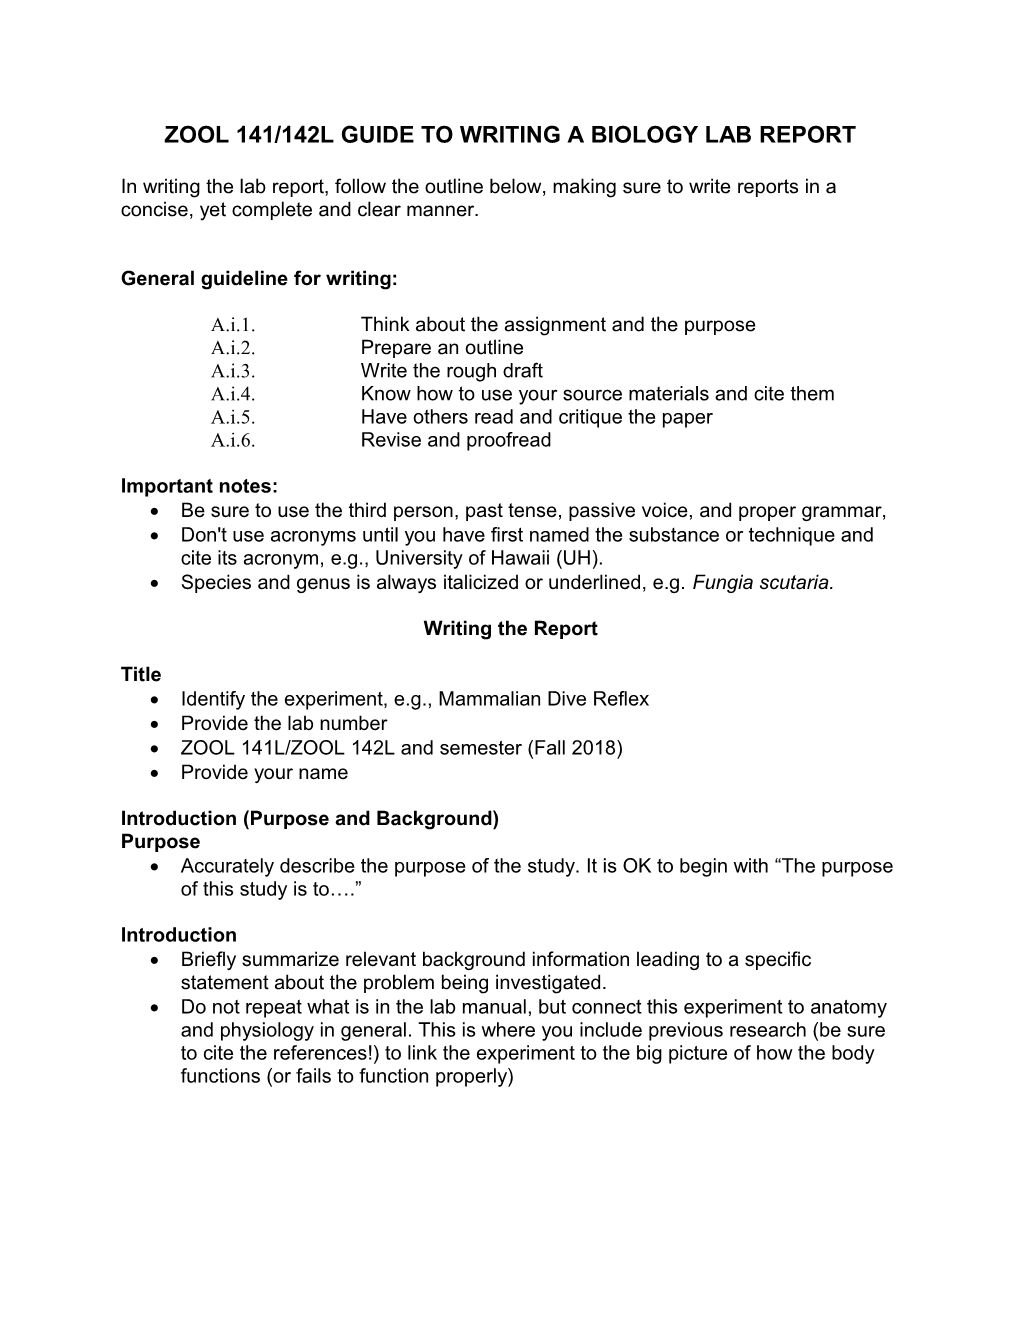 Zool 141/142L Guide to Writing a Biology Lab Report